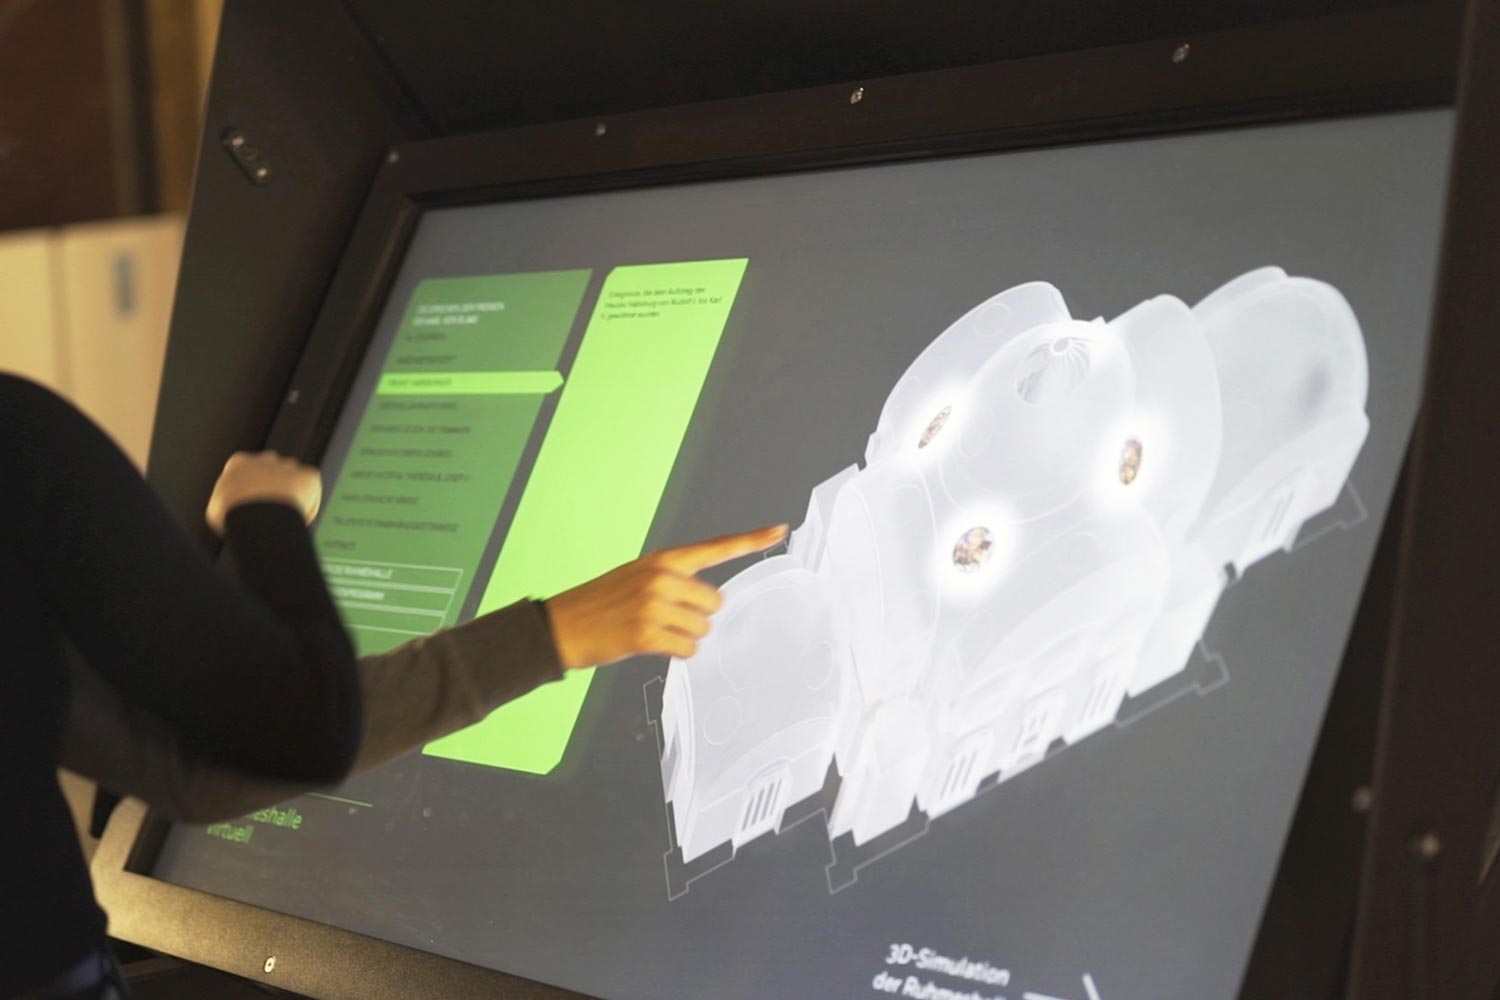 interface of the installation "ruhmeshalle-vr"